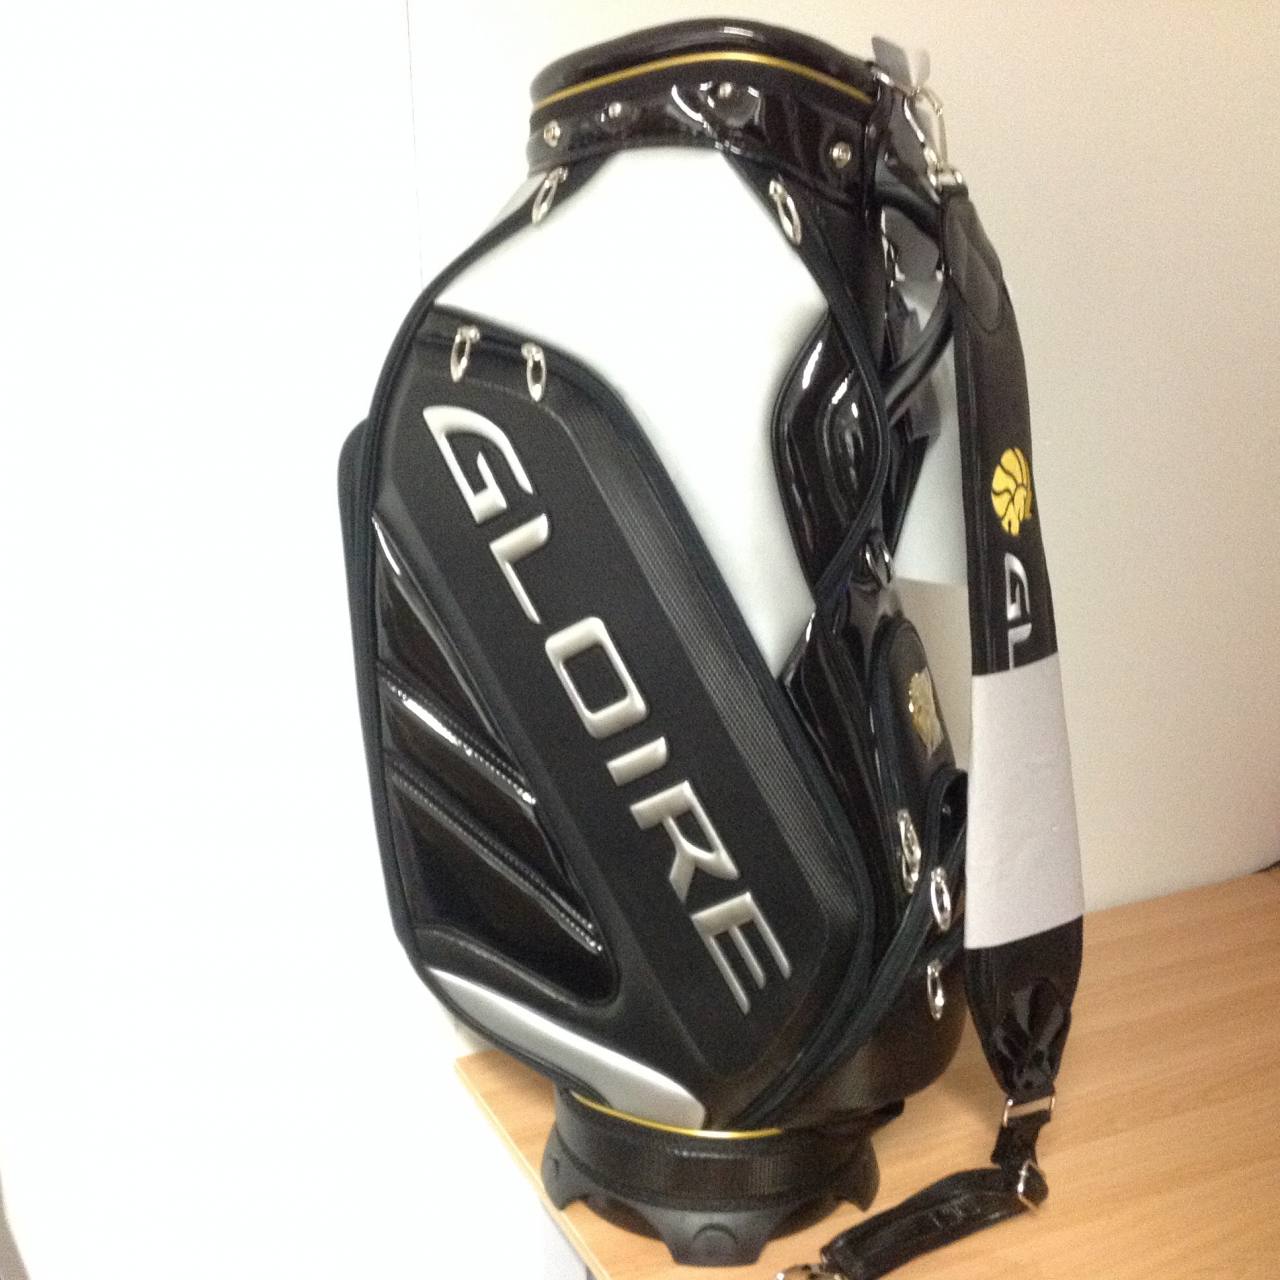 RARE NEW TaylorMade &quot;JAPAN&quot; Gloire Staff / Cart Bag - Black, Silver and Gold | eBay